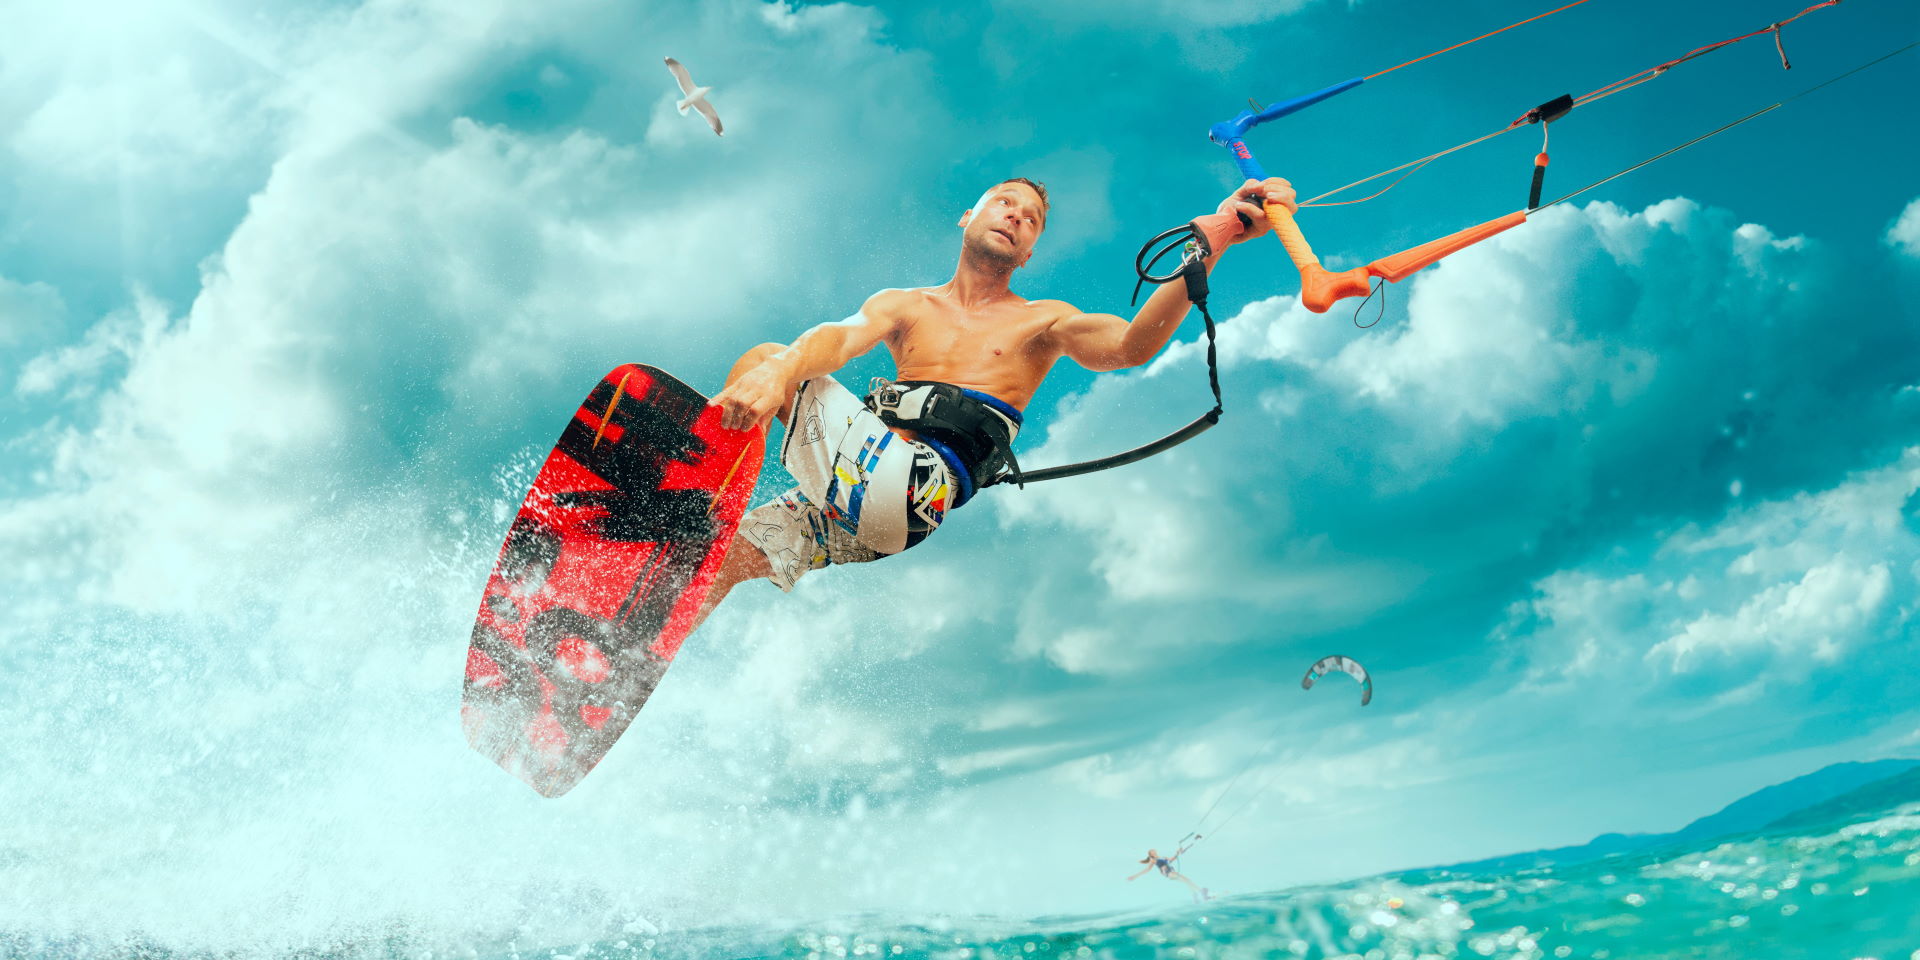 A well-toned athletic man is kitesurfing on a high wave and holding on to the rope